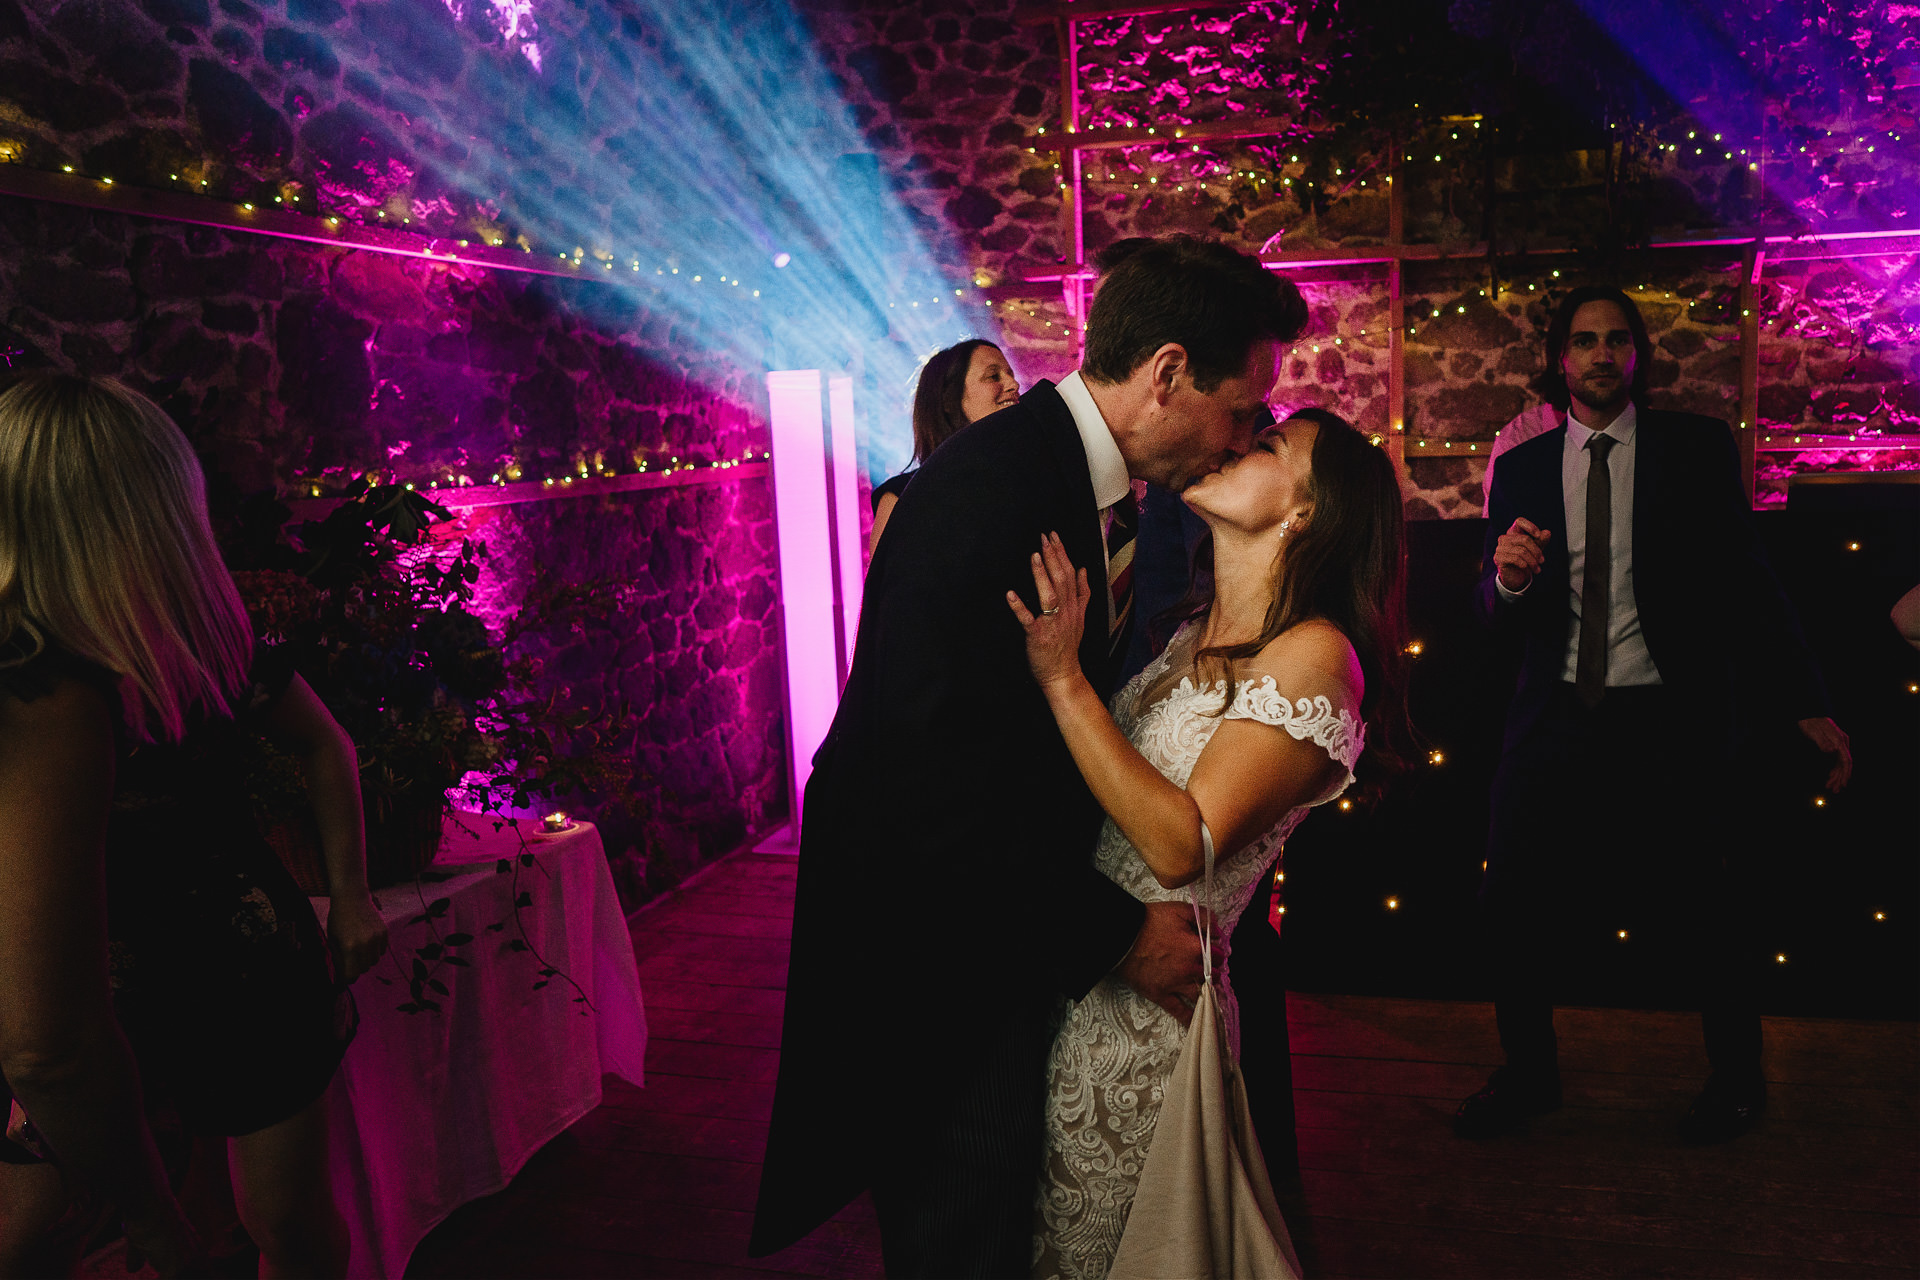 Bride and groom kissing on a dance floor with real wow factor lighting around them in a wedding barn venue